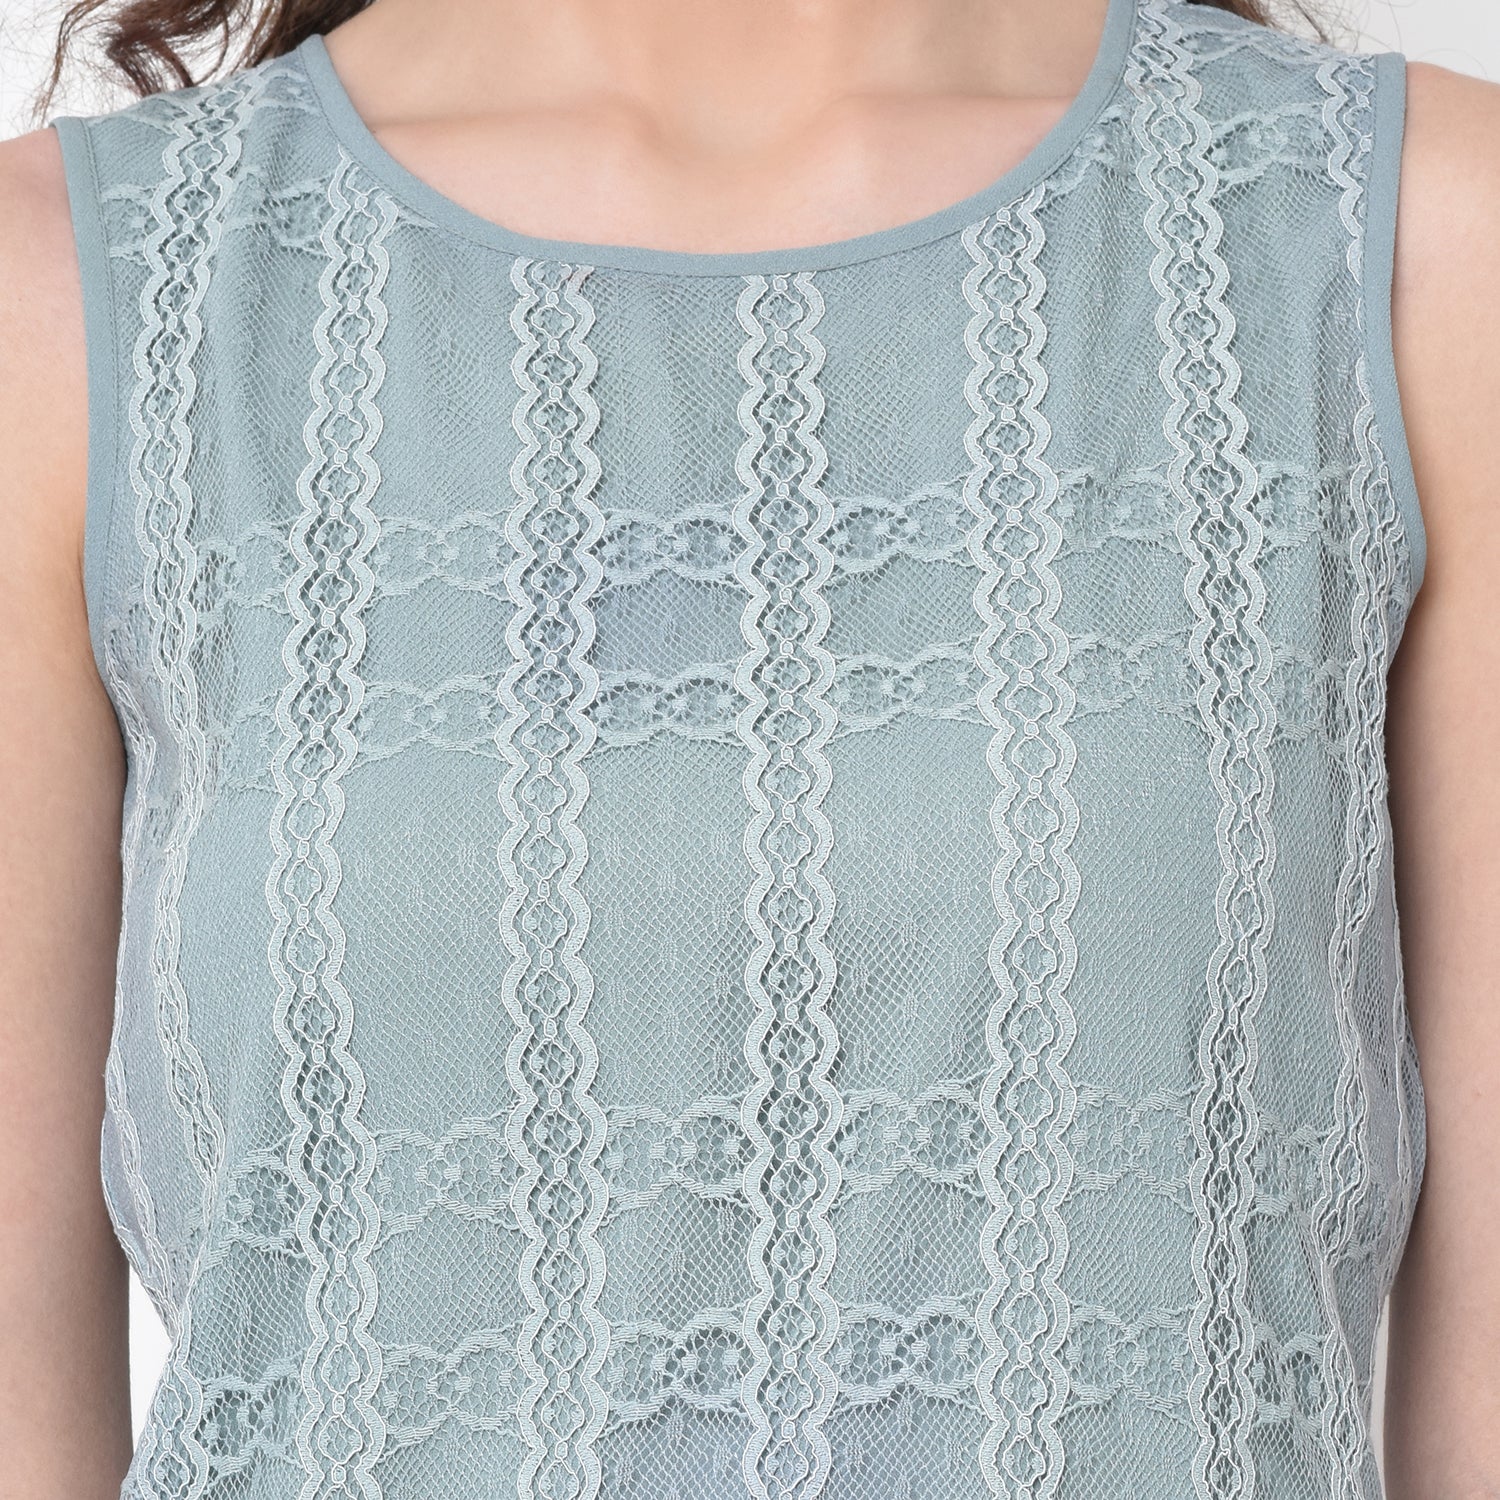 Blue Net Top With French Lace